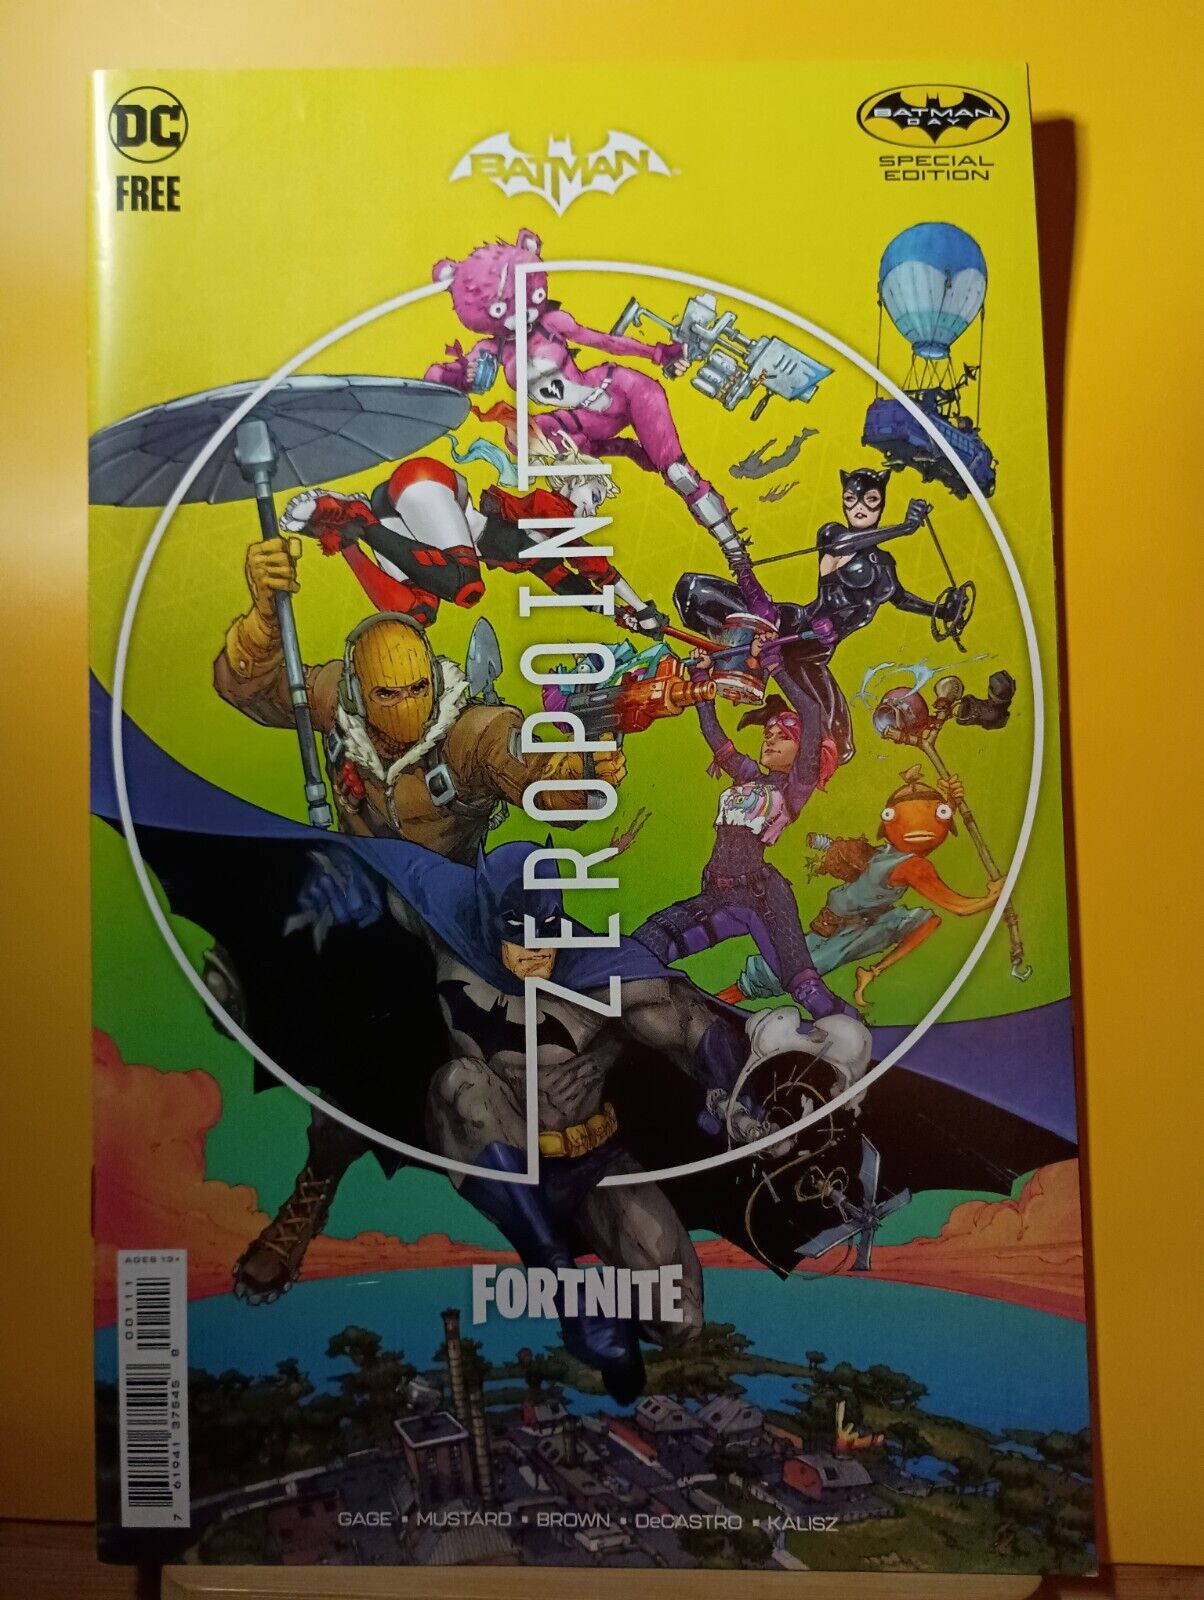 UNSTAMPED 2021 Batman Day Fortnite Zero Point Promotional Giveaway Comic Book 